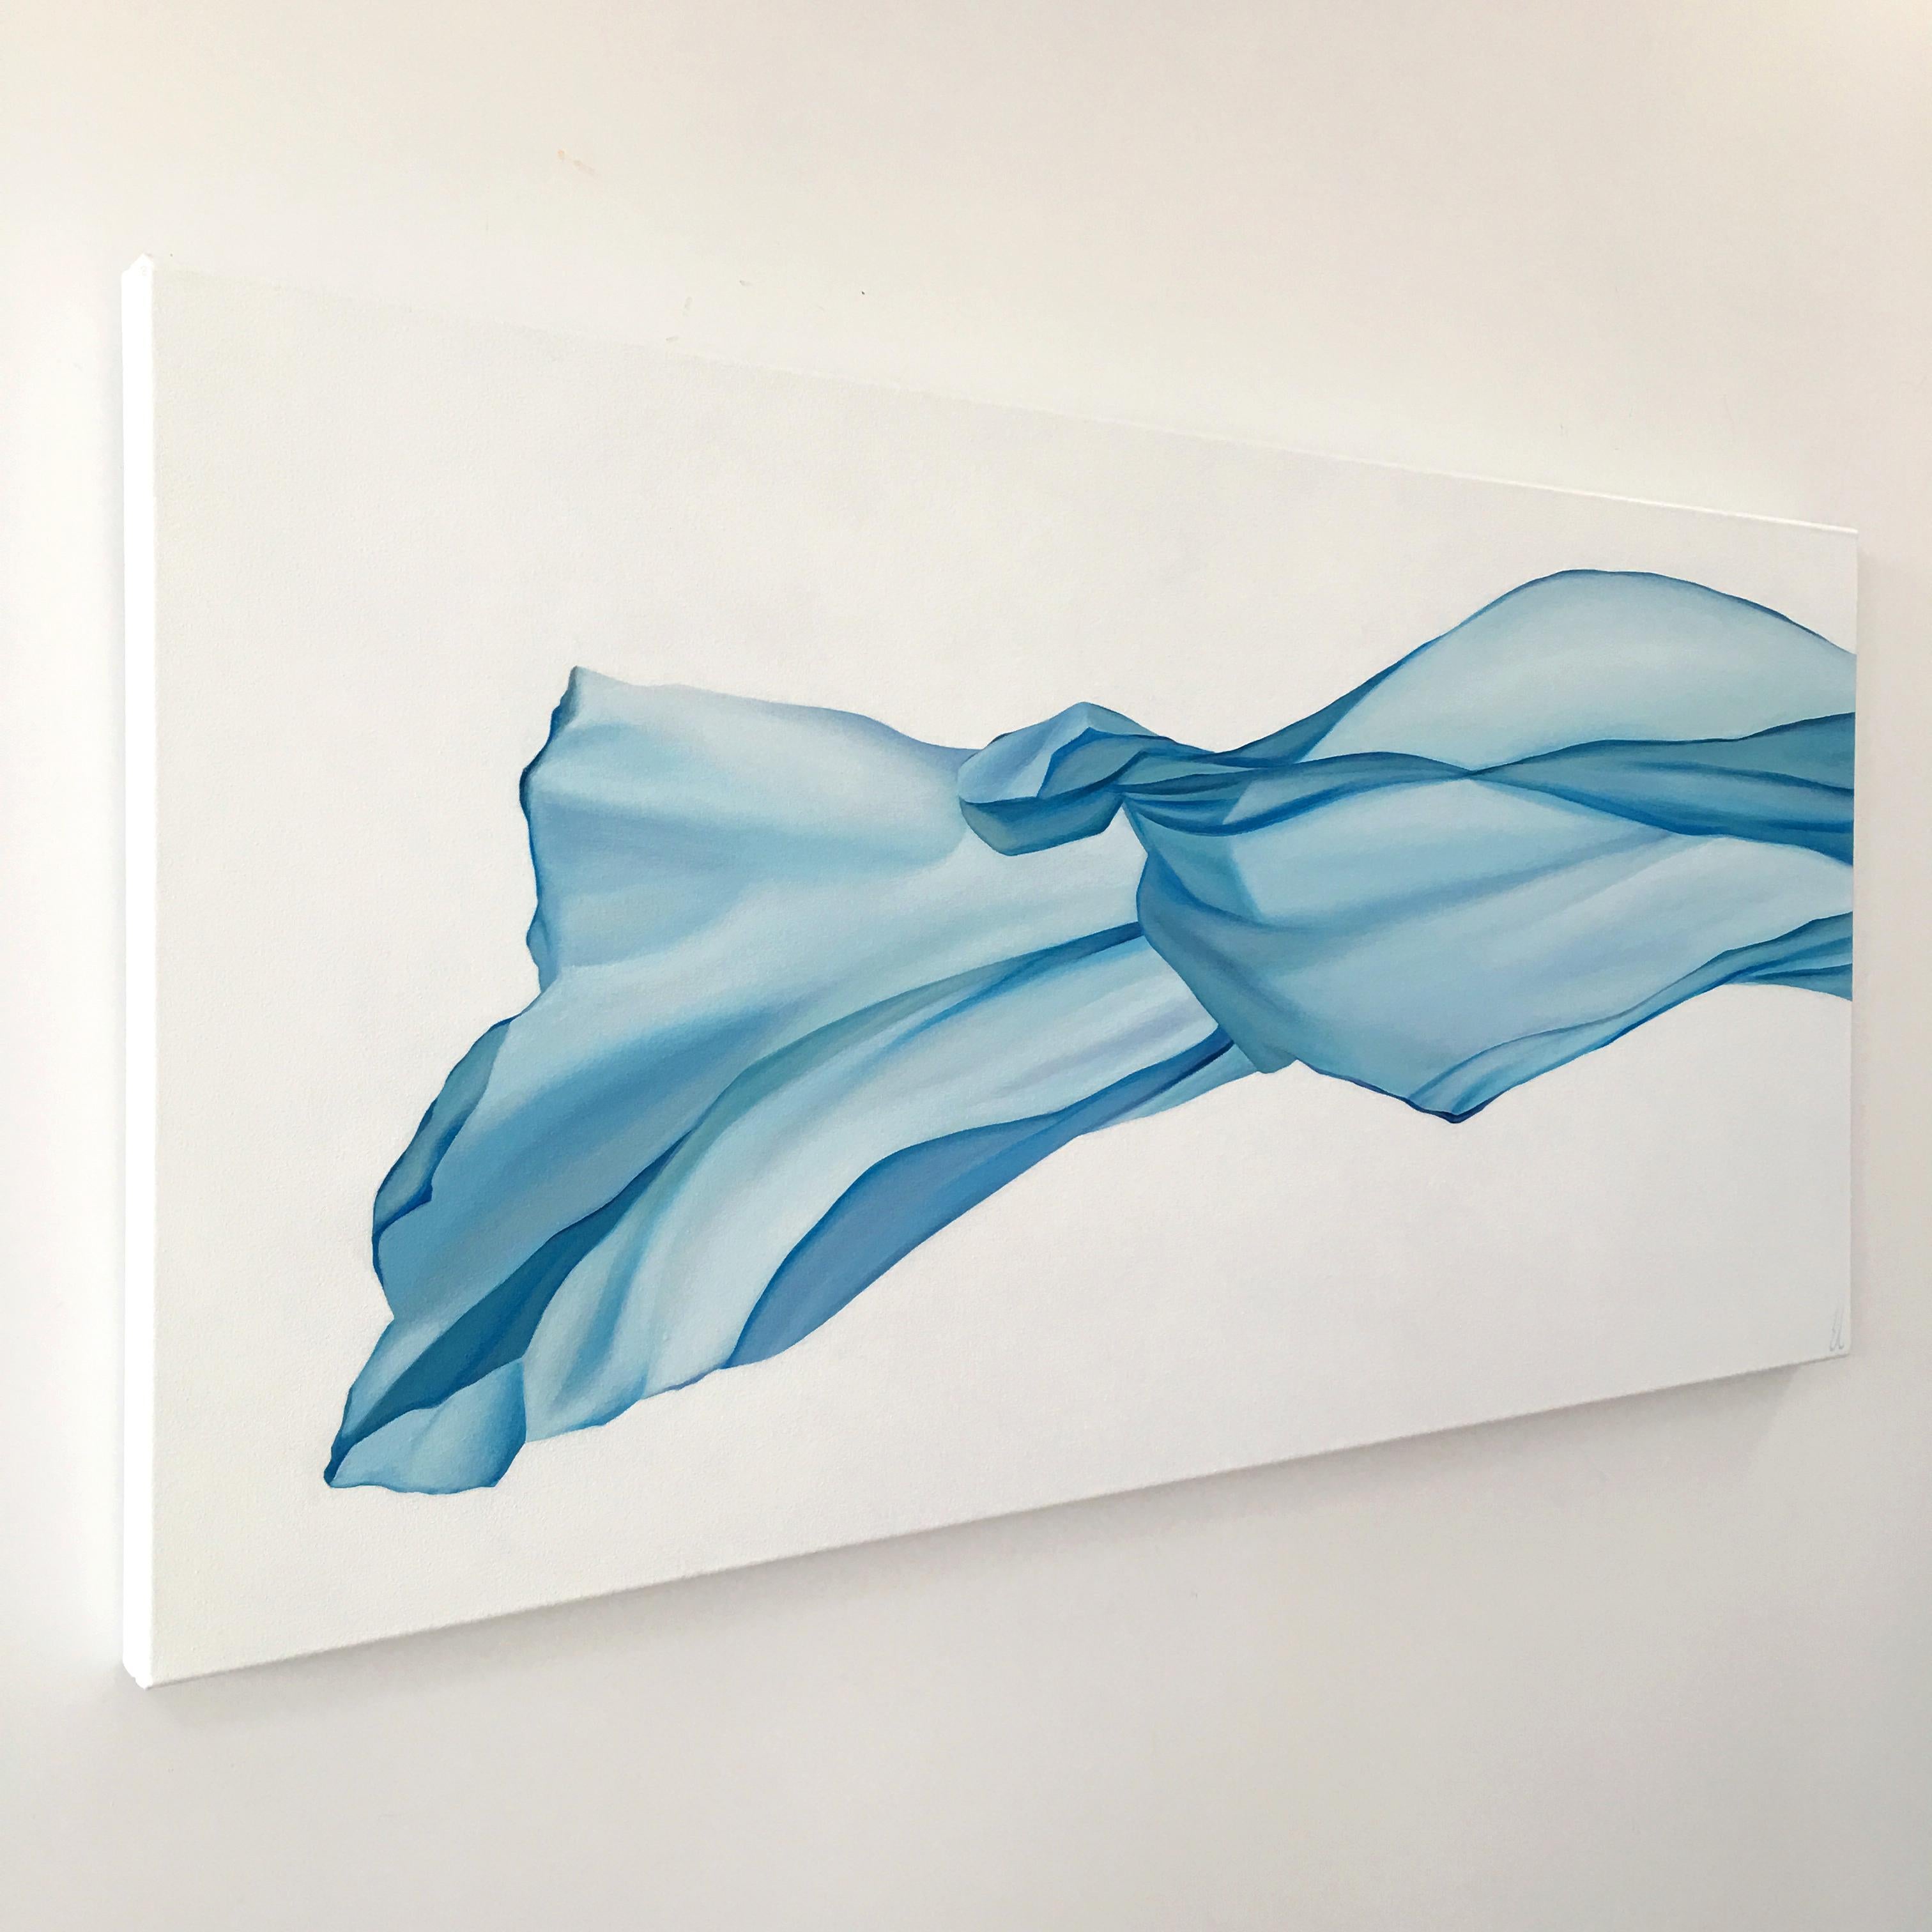 Released 2, acrylic on canvas, modern realism, abstract blue flowing fabric veil - Painting by Erin Cone